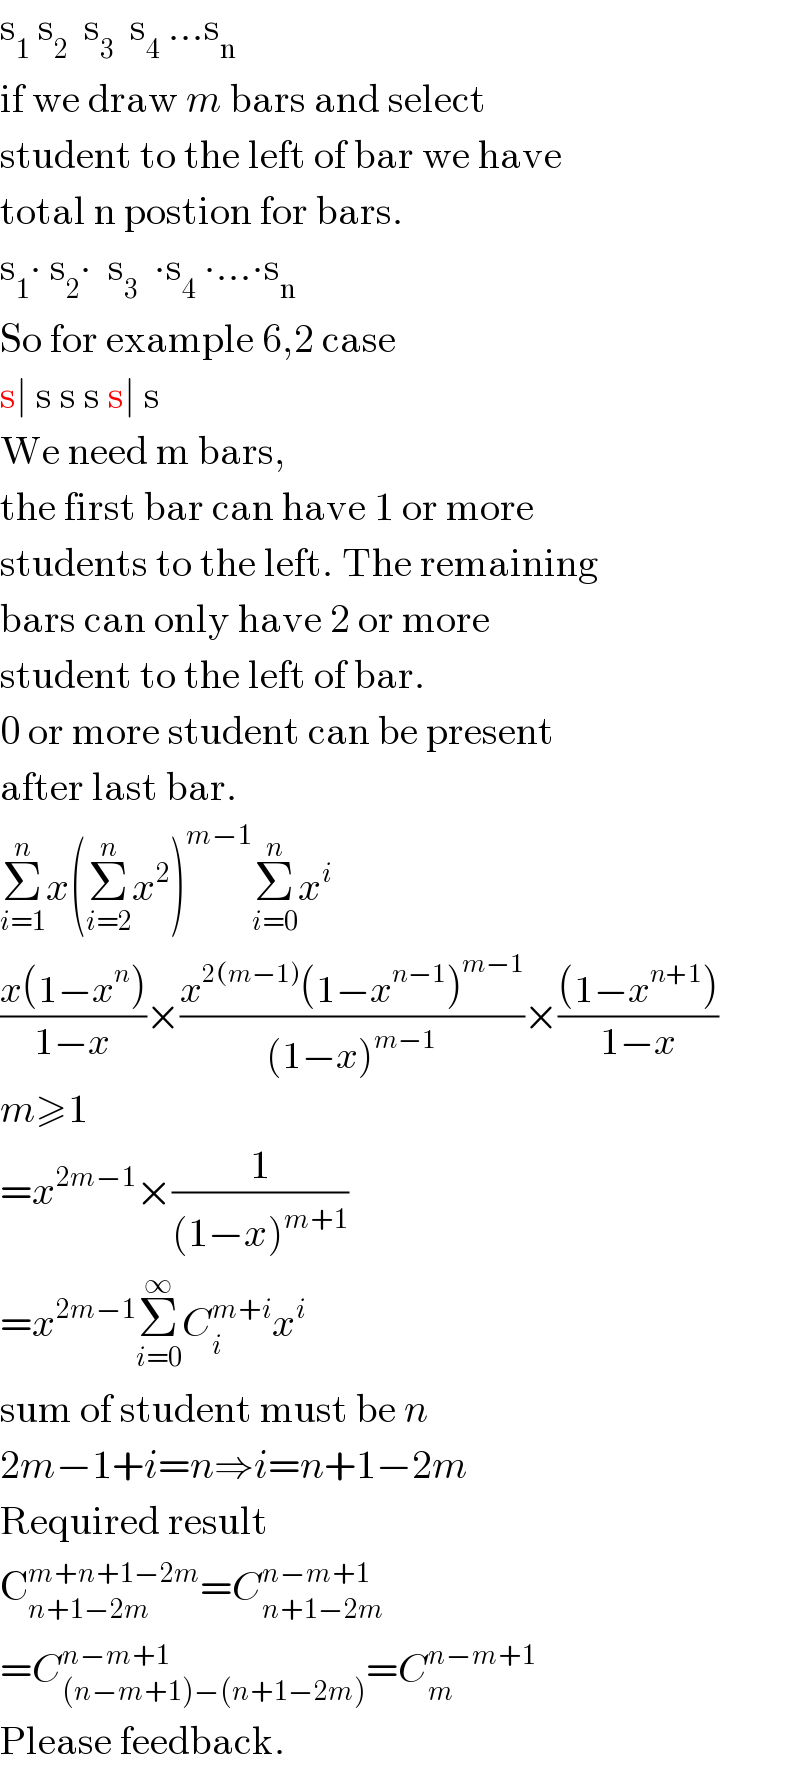 s_1  s_2   s_3   s_4  ...s_n   if we draw m bars and select  student to the left of bar we have  total n postion for bars.  s_1 ∙ s_2 ∙  s_3   ∙s_4  ∙...∙s_n   So for example 6,2 case  s∣ s s s s∣ s  We need m bars,  the first bar can have 1 or more  students to the left. The remaining  bars can only have 2 or more  student to the left of bar.  0 or more student can be present  after last bar.  Σ_(i=1) ^n x(Σ_(i=2) ^n x^2 )^(m−1) Σ_(i=0) ^n x^i   ((x(1−x^n ))/(1−x))×((x^(2(m−1)) (1−x^(n−1) )^(m−1) )/((1−x)^(m−1) ))×(((1−x^(n+1) ))/(1−x))  m≥1  =x^(2m−1) ×(1/((1−x)^(m+1) ))  =x^(2m−1) Σ_(i=0) ^∞ C_i ^(m+i) x^i   sum of student must be n  2m−1+i=n⇒i=n+1−2m  Required result  C_(n+1−2m) ^(m+n+1−2m) =C_(n+1−2m) ^(n−m+1)   =C_((n−m+1)−(n+1−2m)) ^(n−m+1) =C_m ^(n−m+1)   Please feedback.  